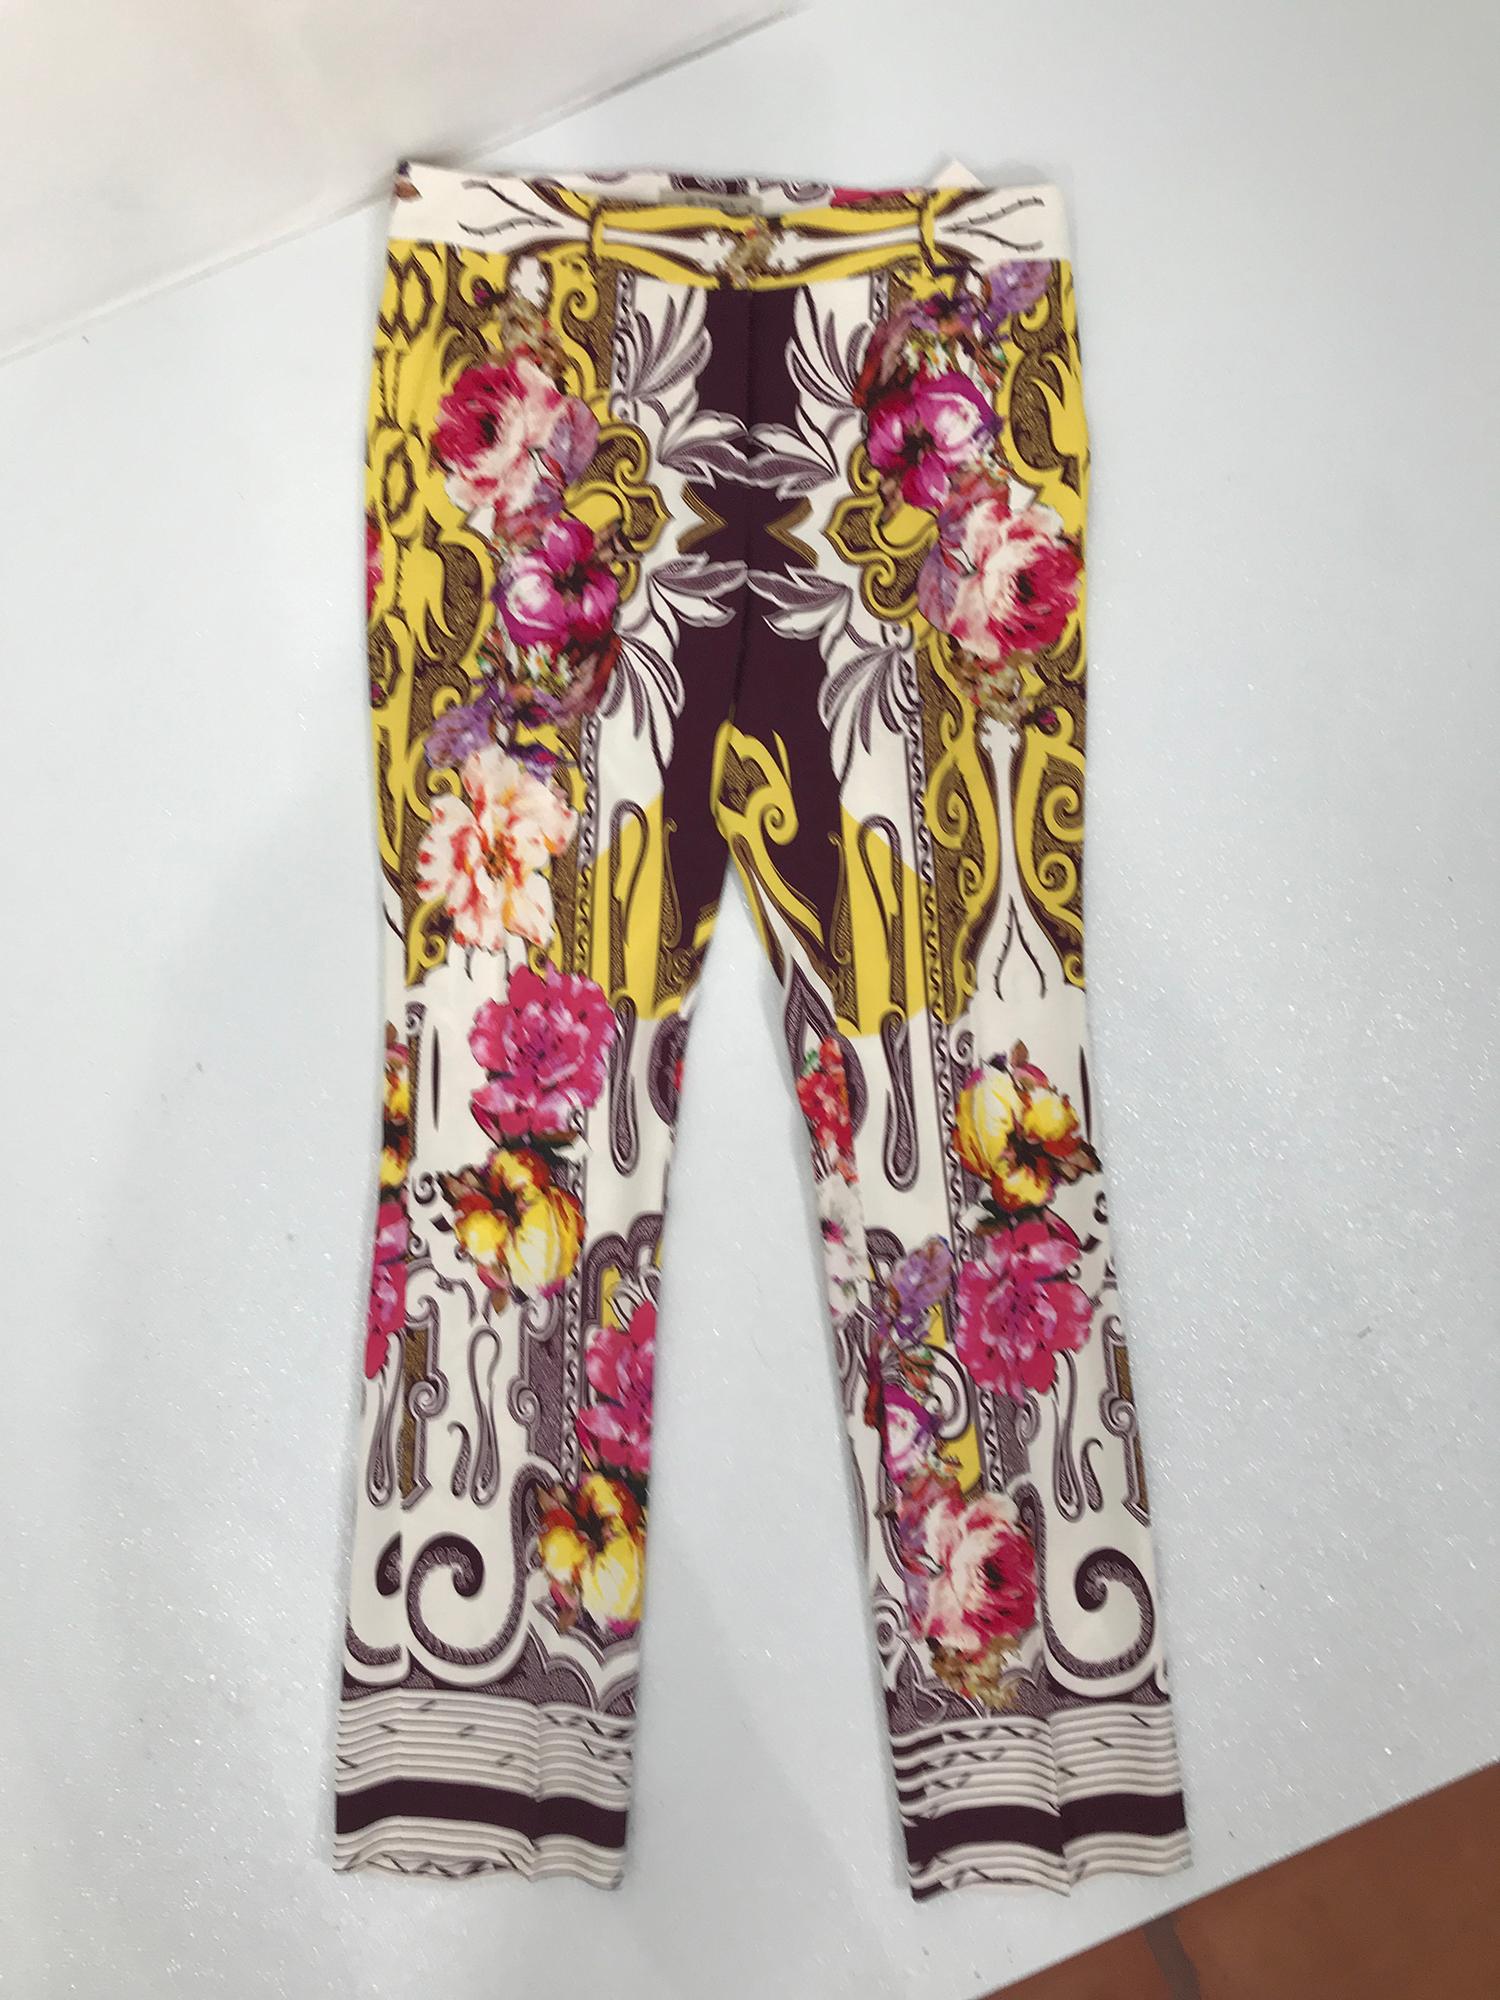 Etro floral trousers unworn size EU 46 US 10. Print and photo print of flowers in pink and yellow, off white ground with burgundy paisley print, striped hems. Banded waist, fly front hidden hook at waist and belt loops. Side pockets, hip back besom